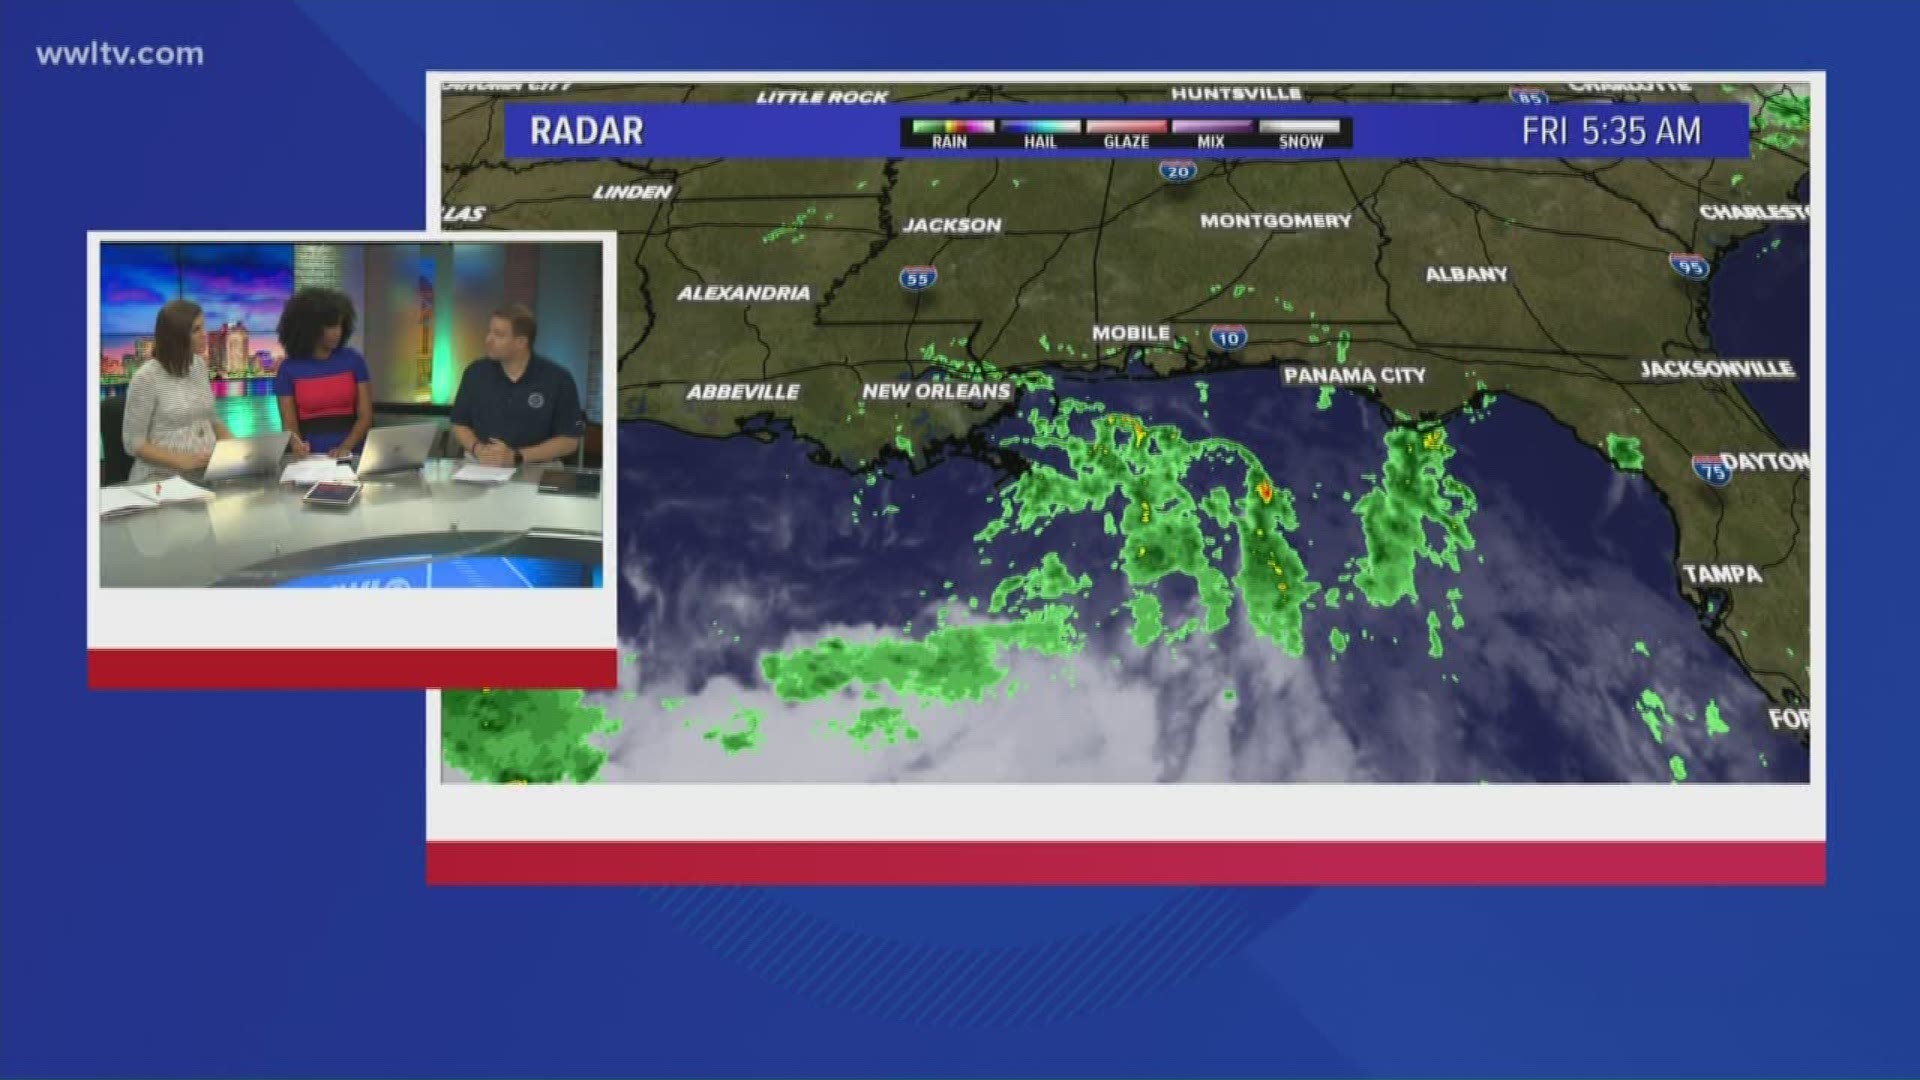 Jefferson Parish President Mike Yenni talks about the parish's last minute preparations for Tropical Storm Barry's expected heavy rains.